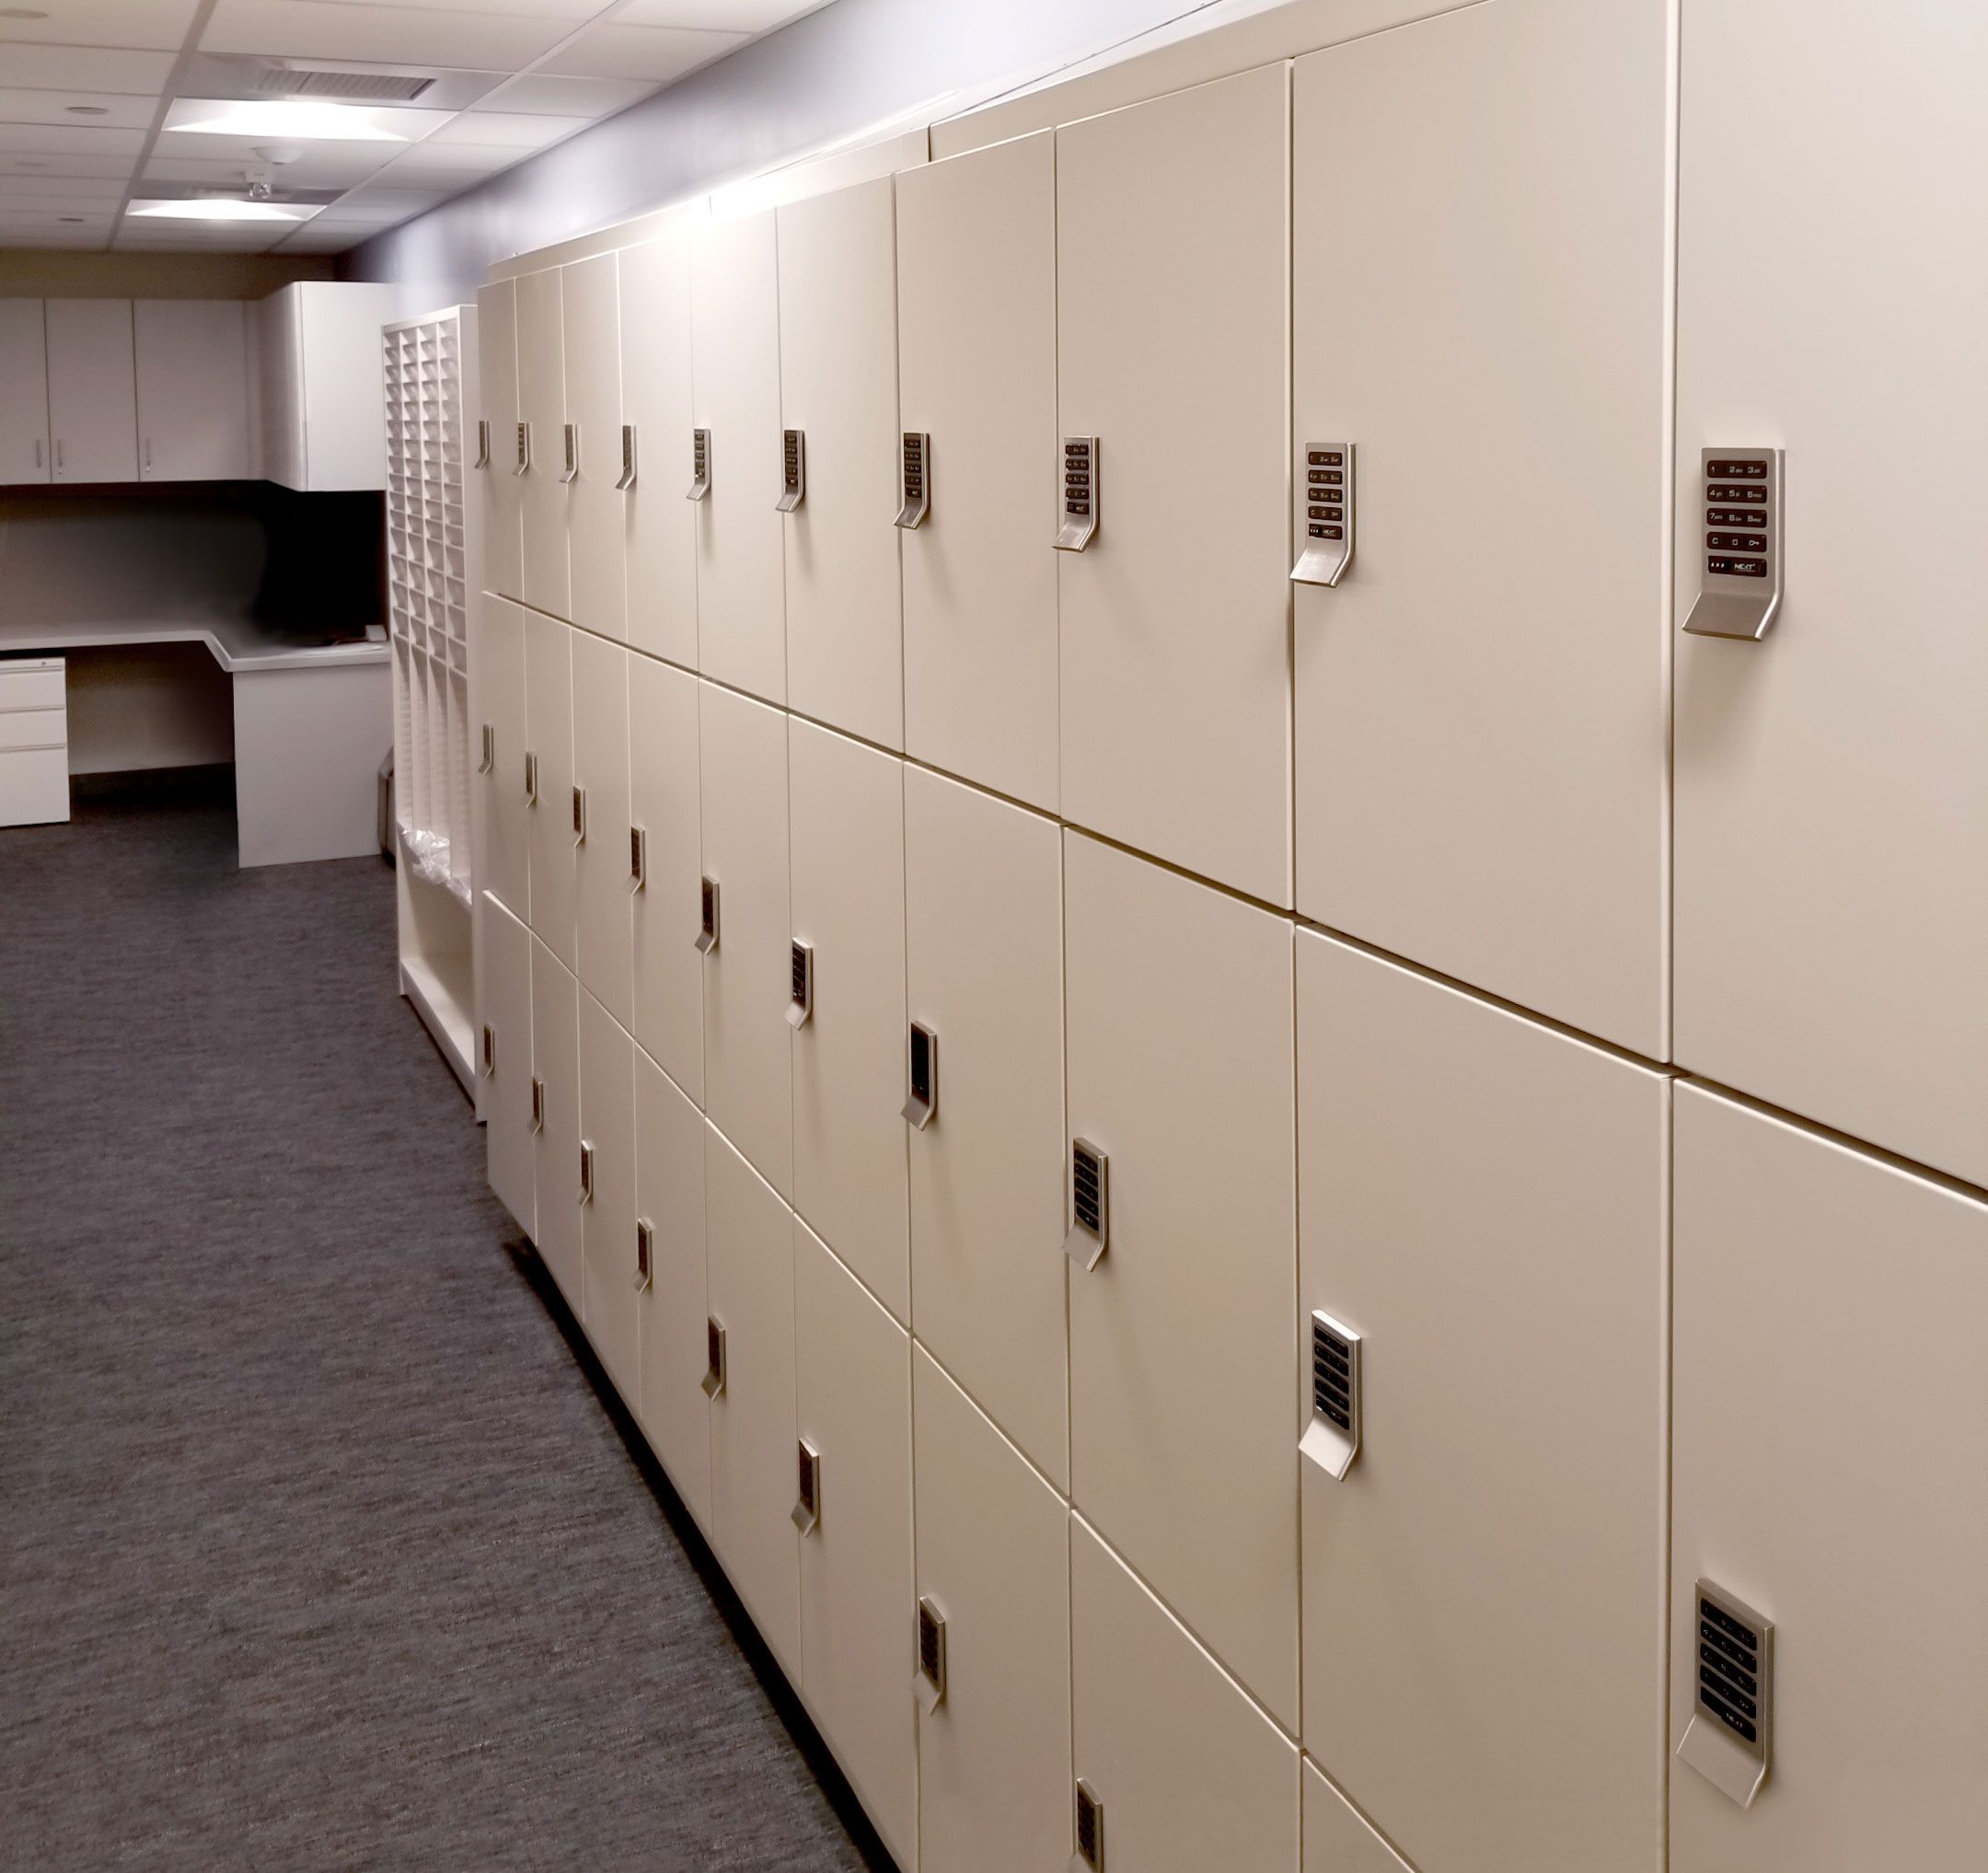 personal storage locker wall in a healthcare facility